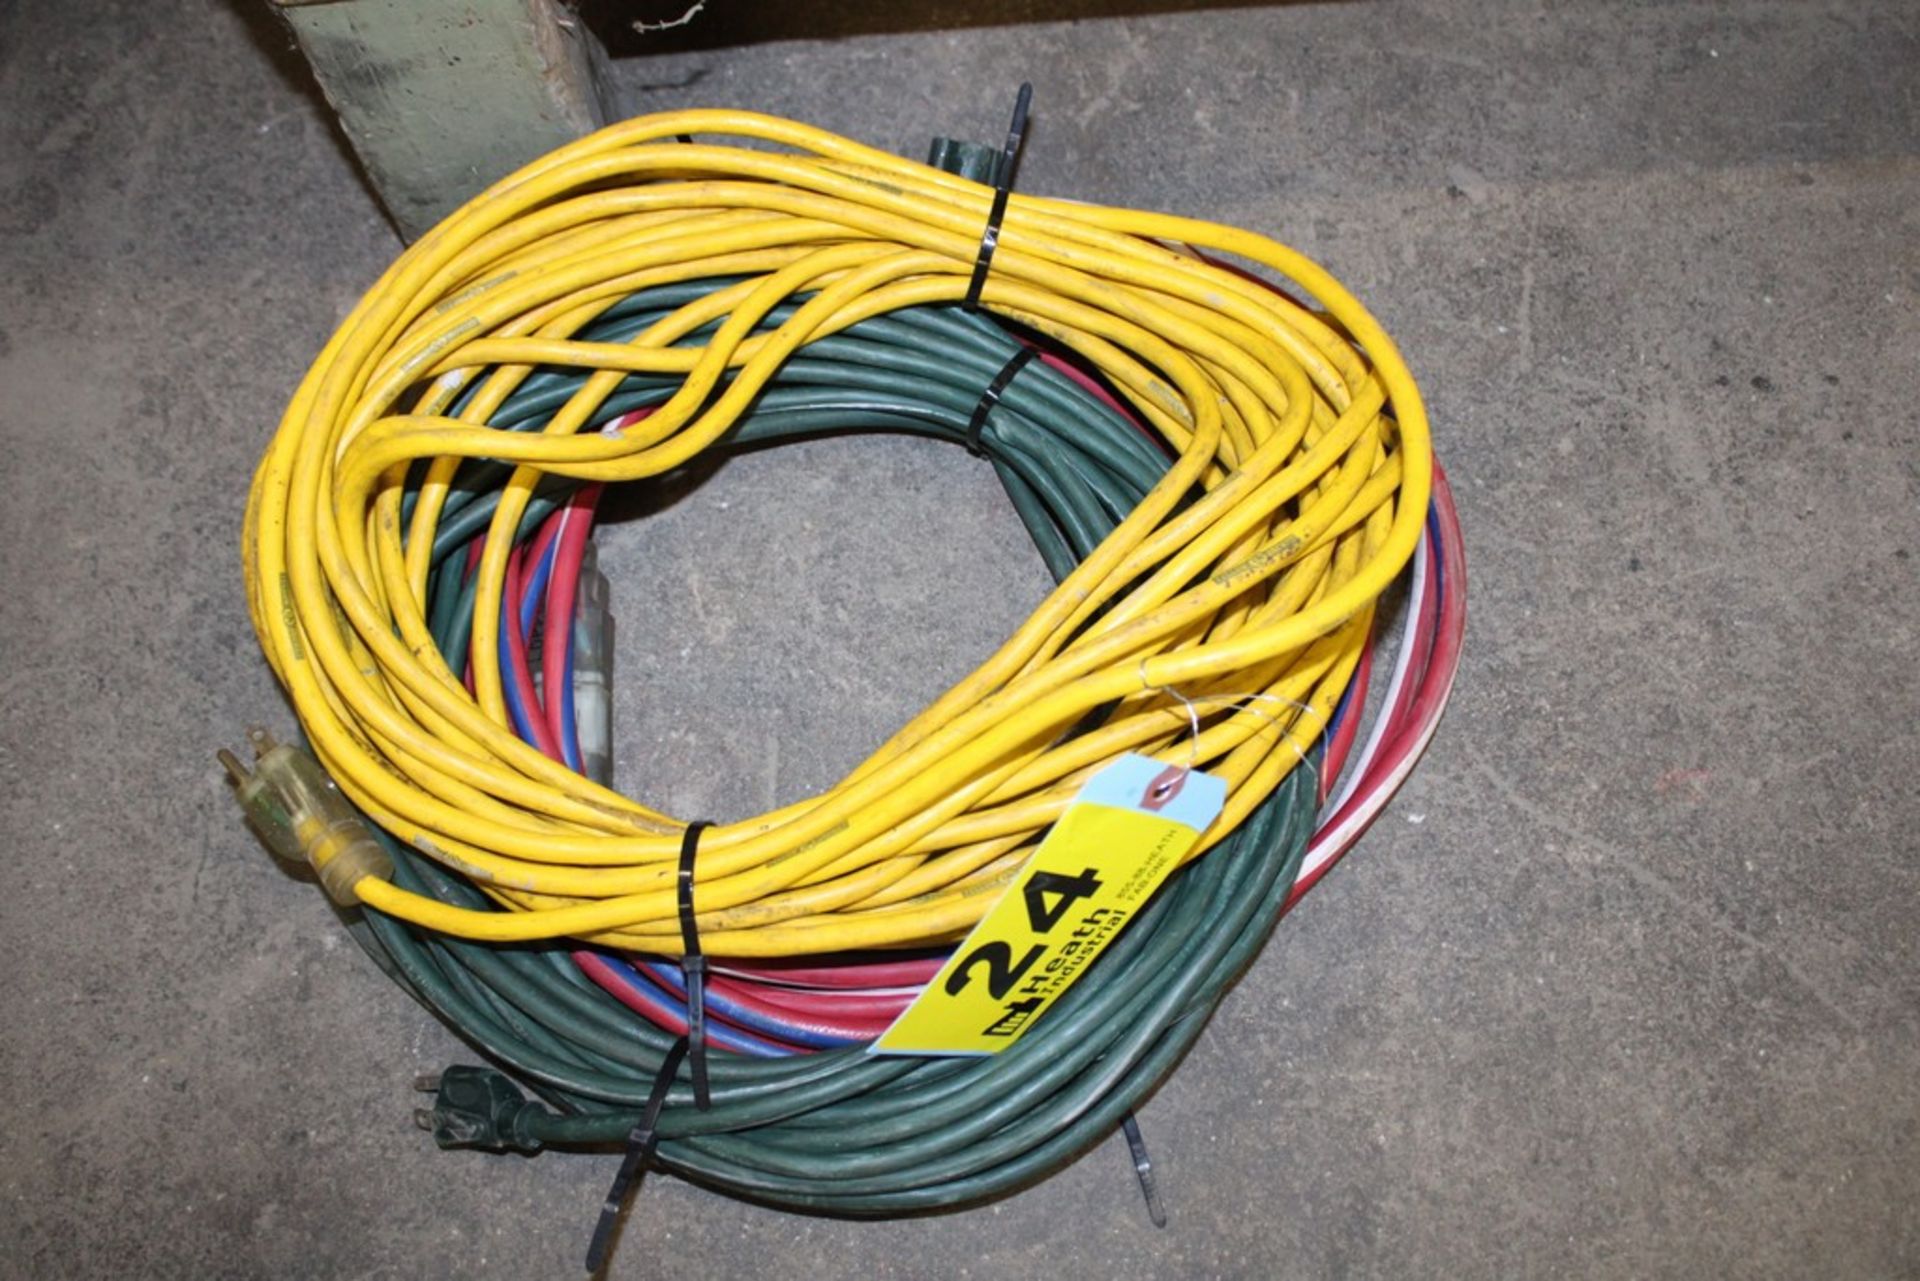 (3) ASSORTED ELECTRICAL EXTENSION CORDS